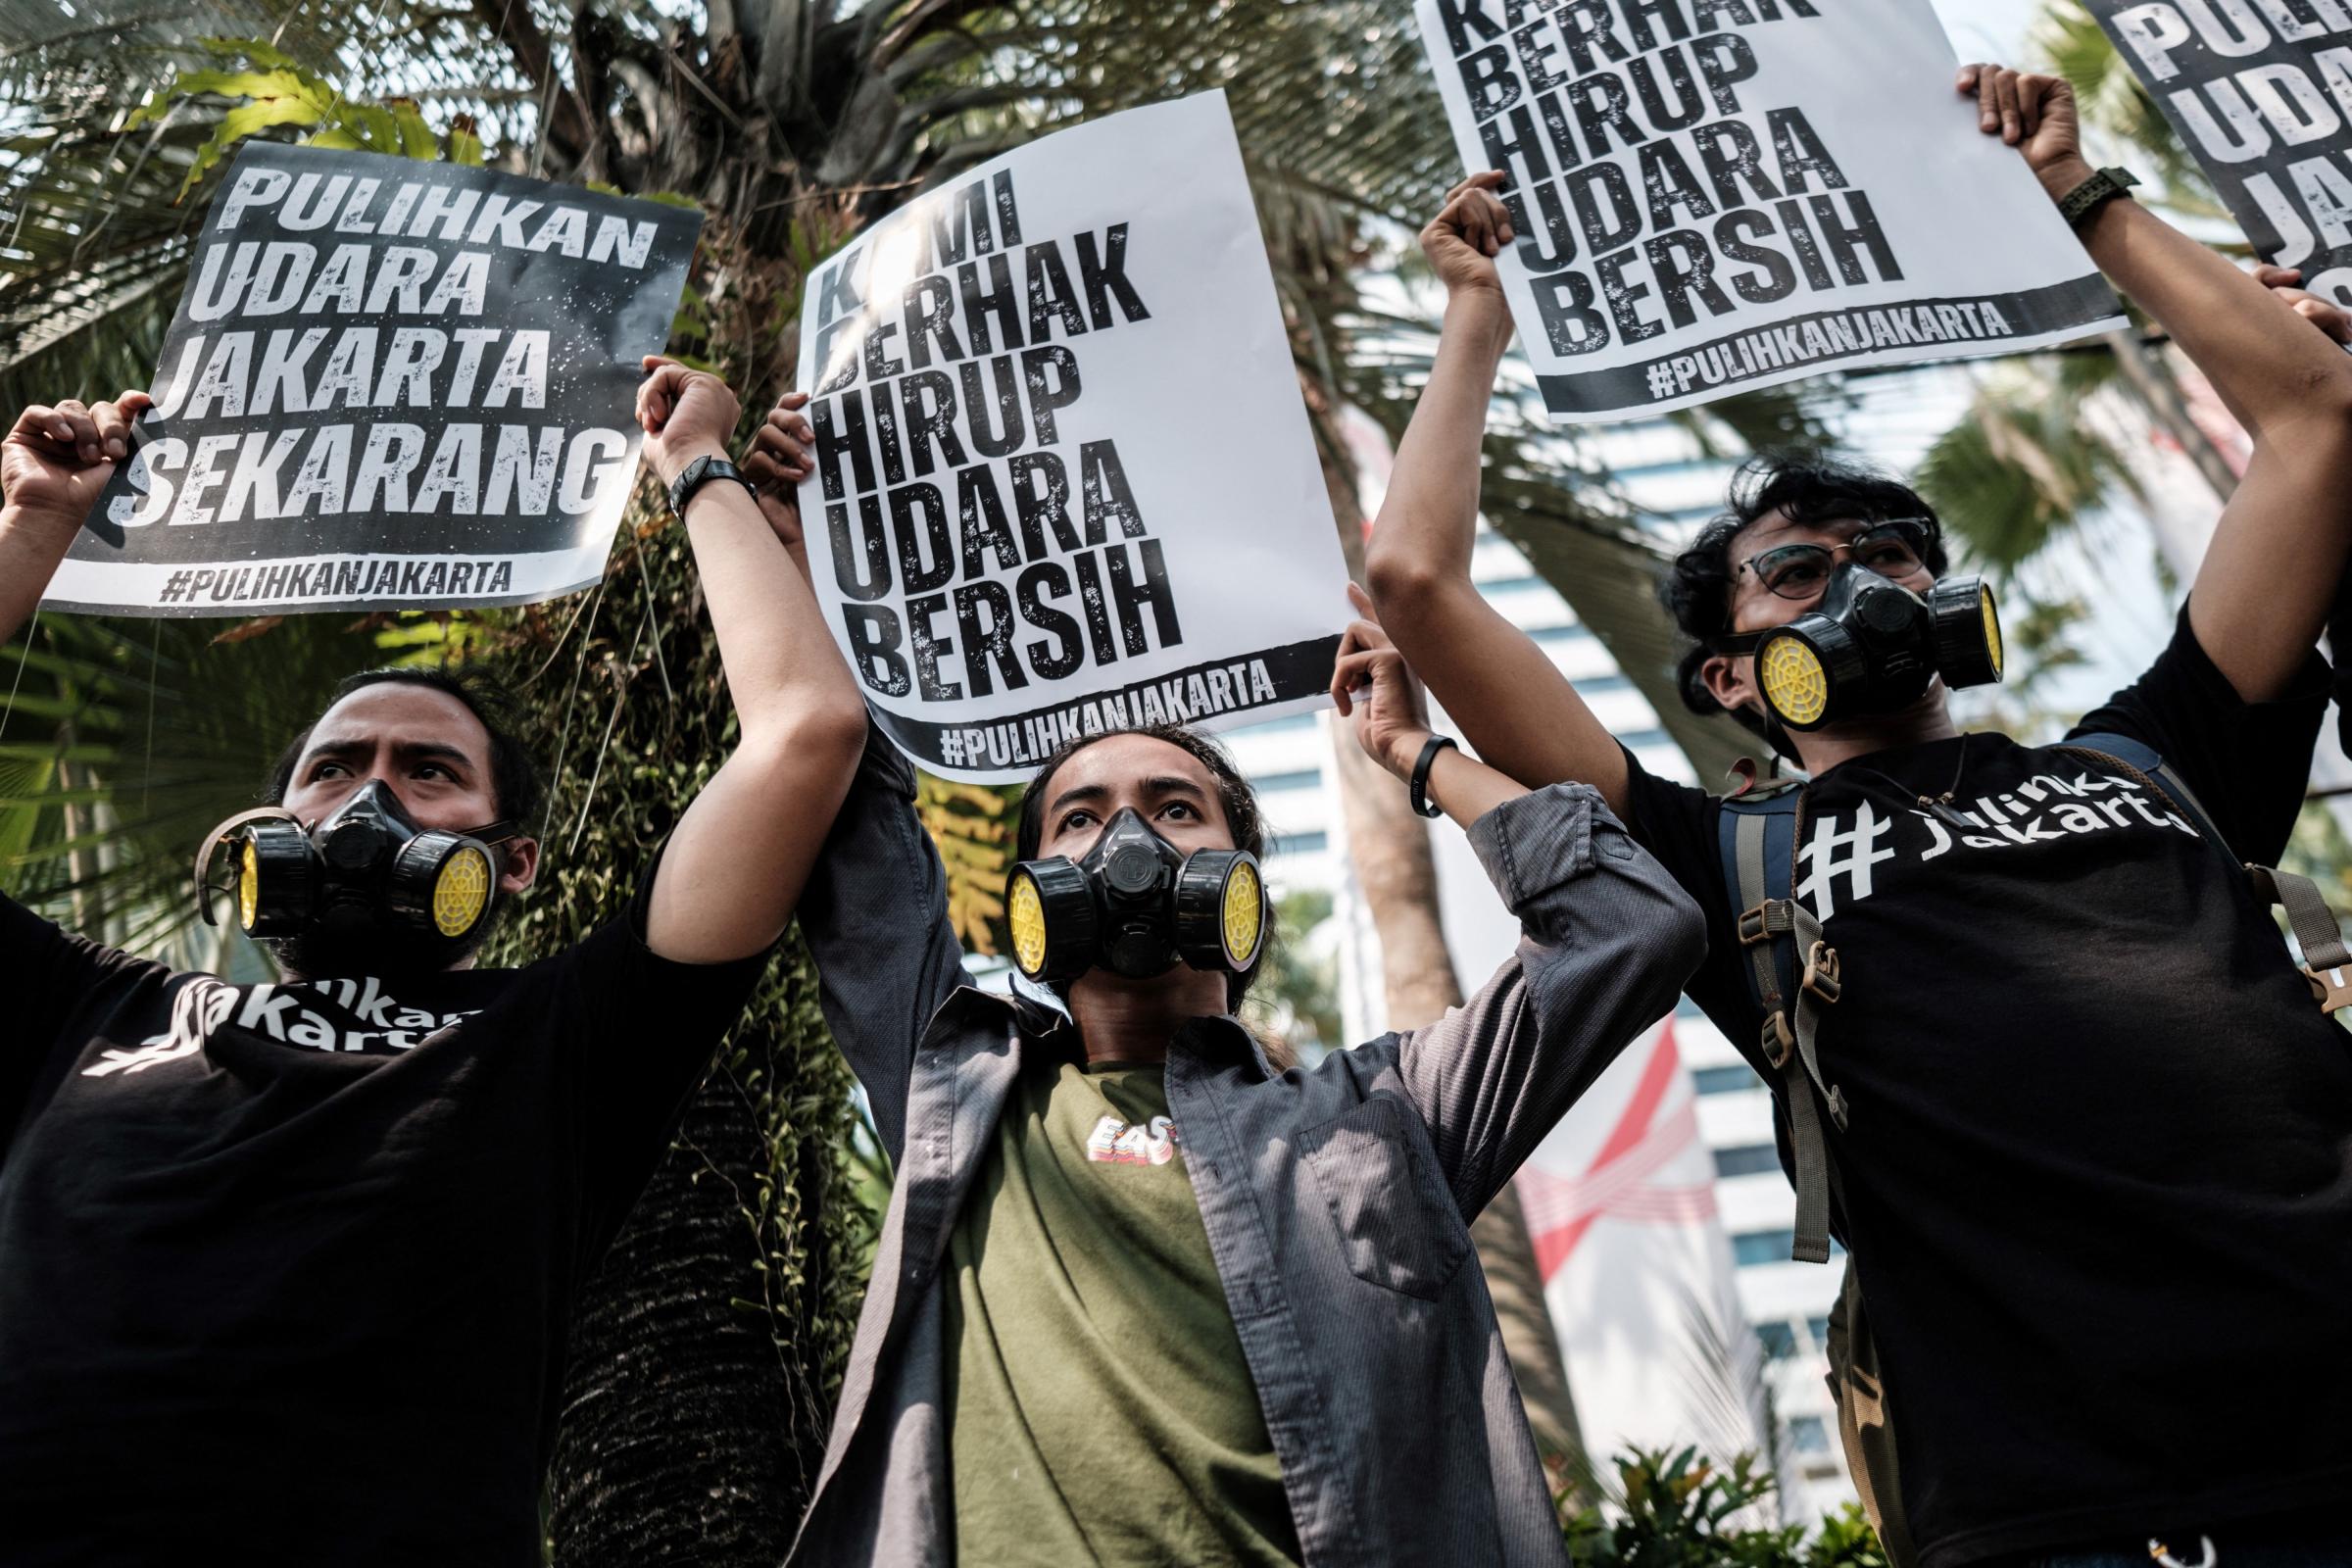 INDONESIA-PROTEST-ENVIRONMENT